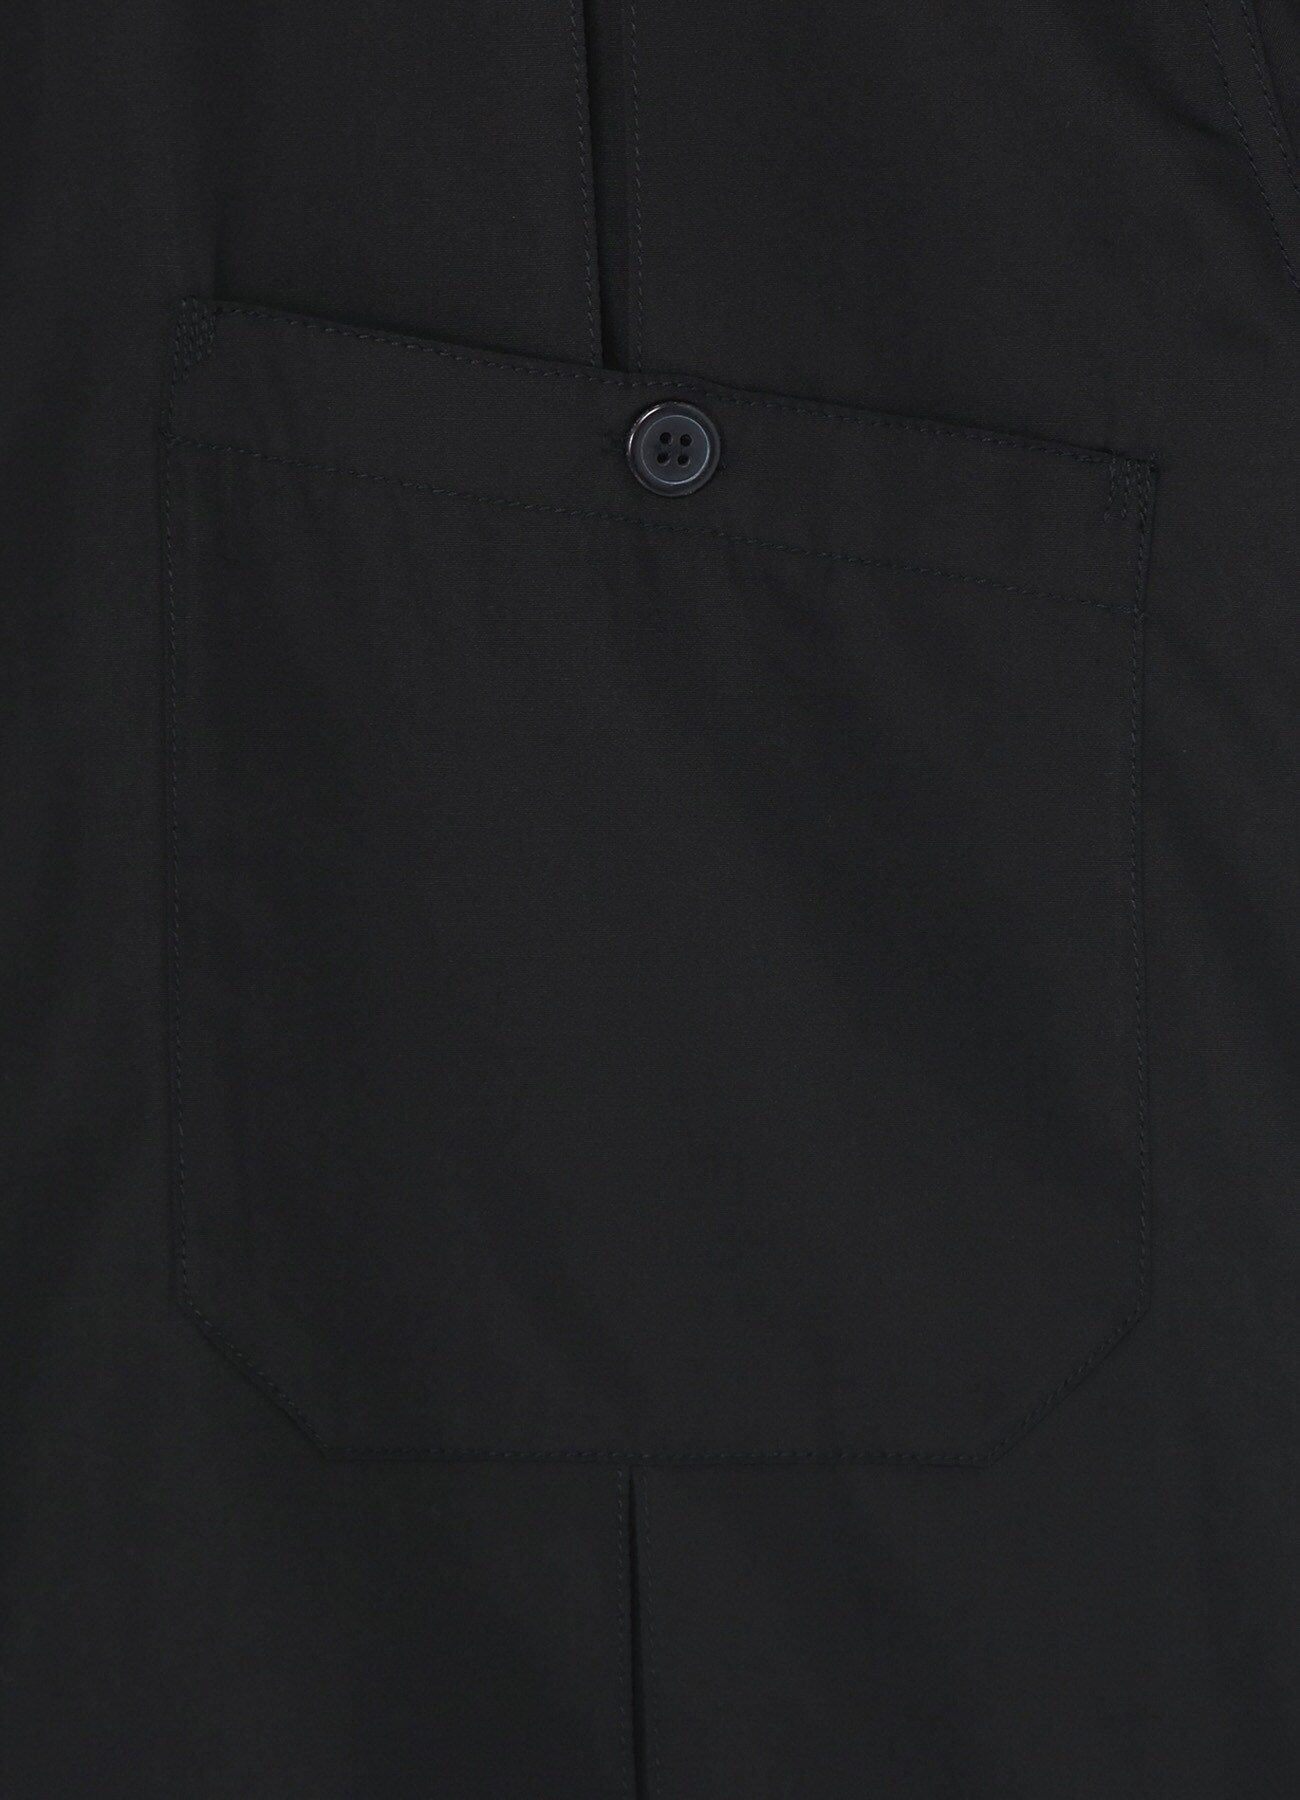 COTTON BROAD VERTICAL GUSSET SHIRTS